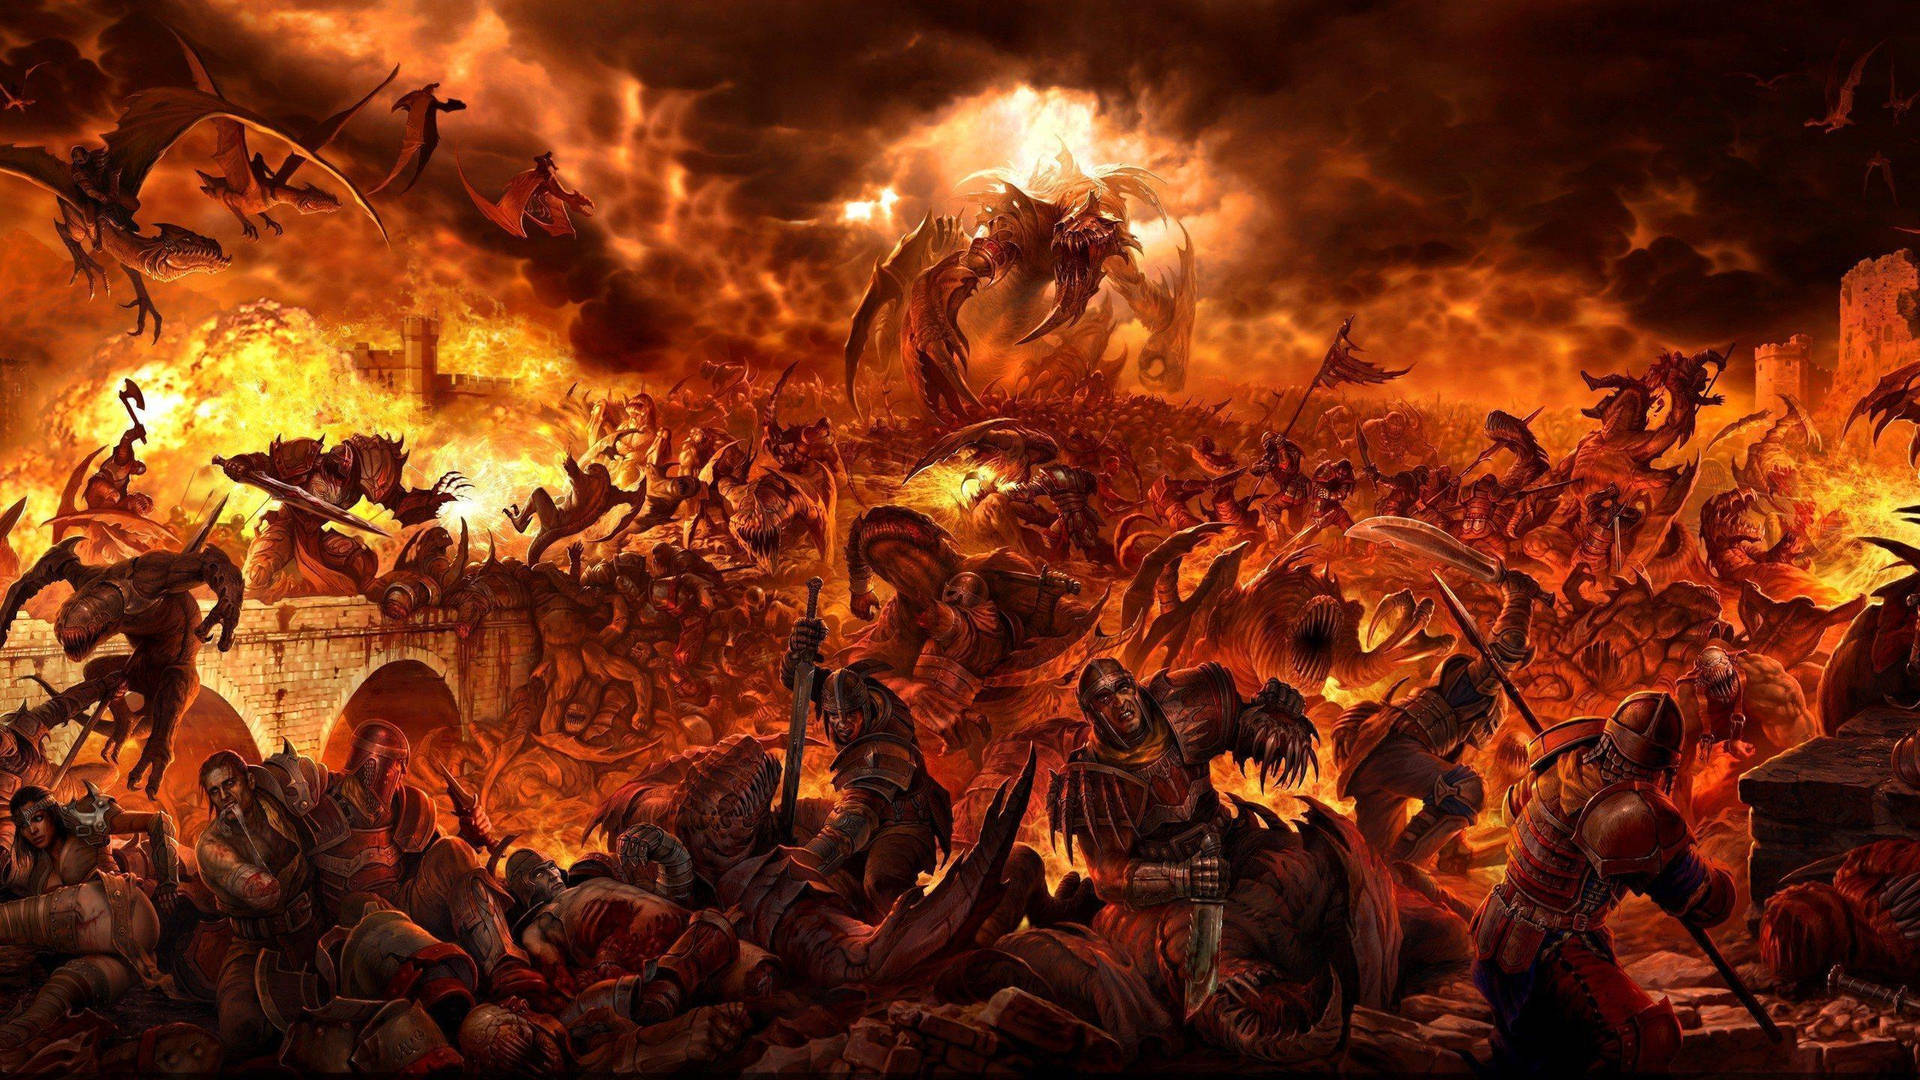 A Large Battle Scene With Many Demons And Monsters Wallpaper